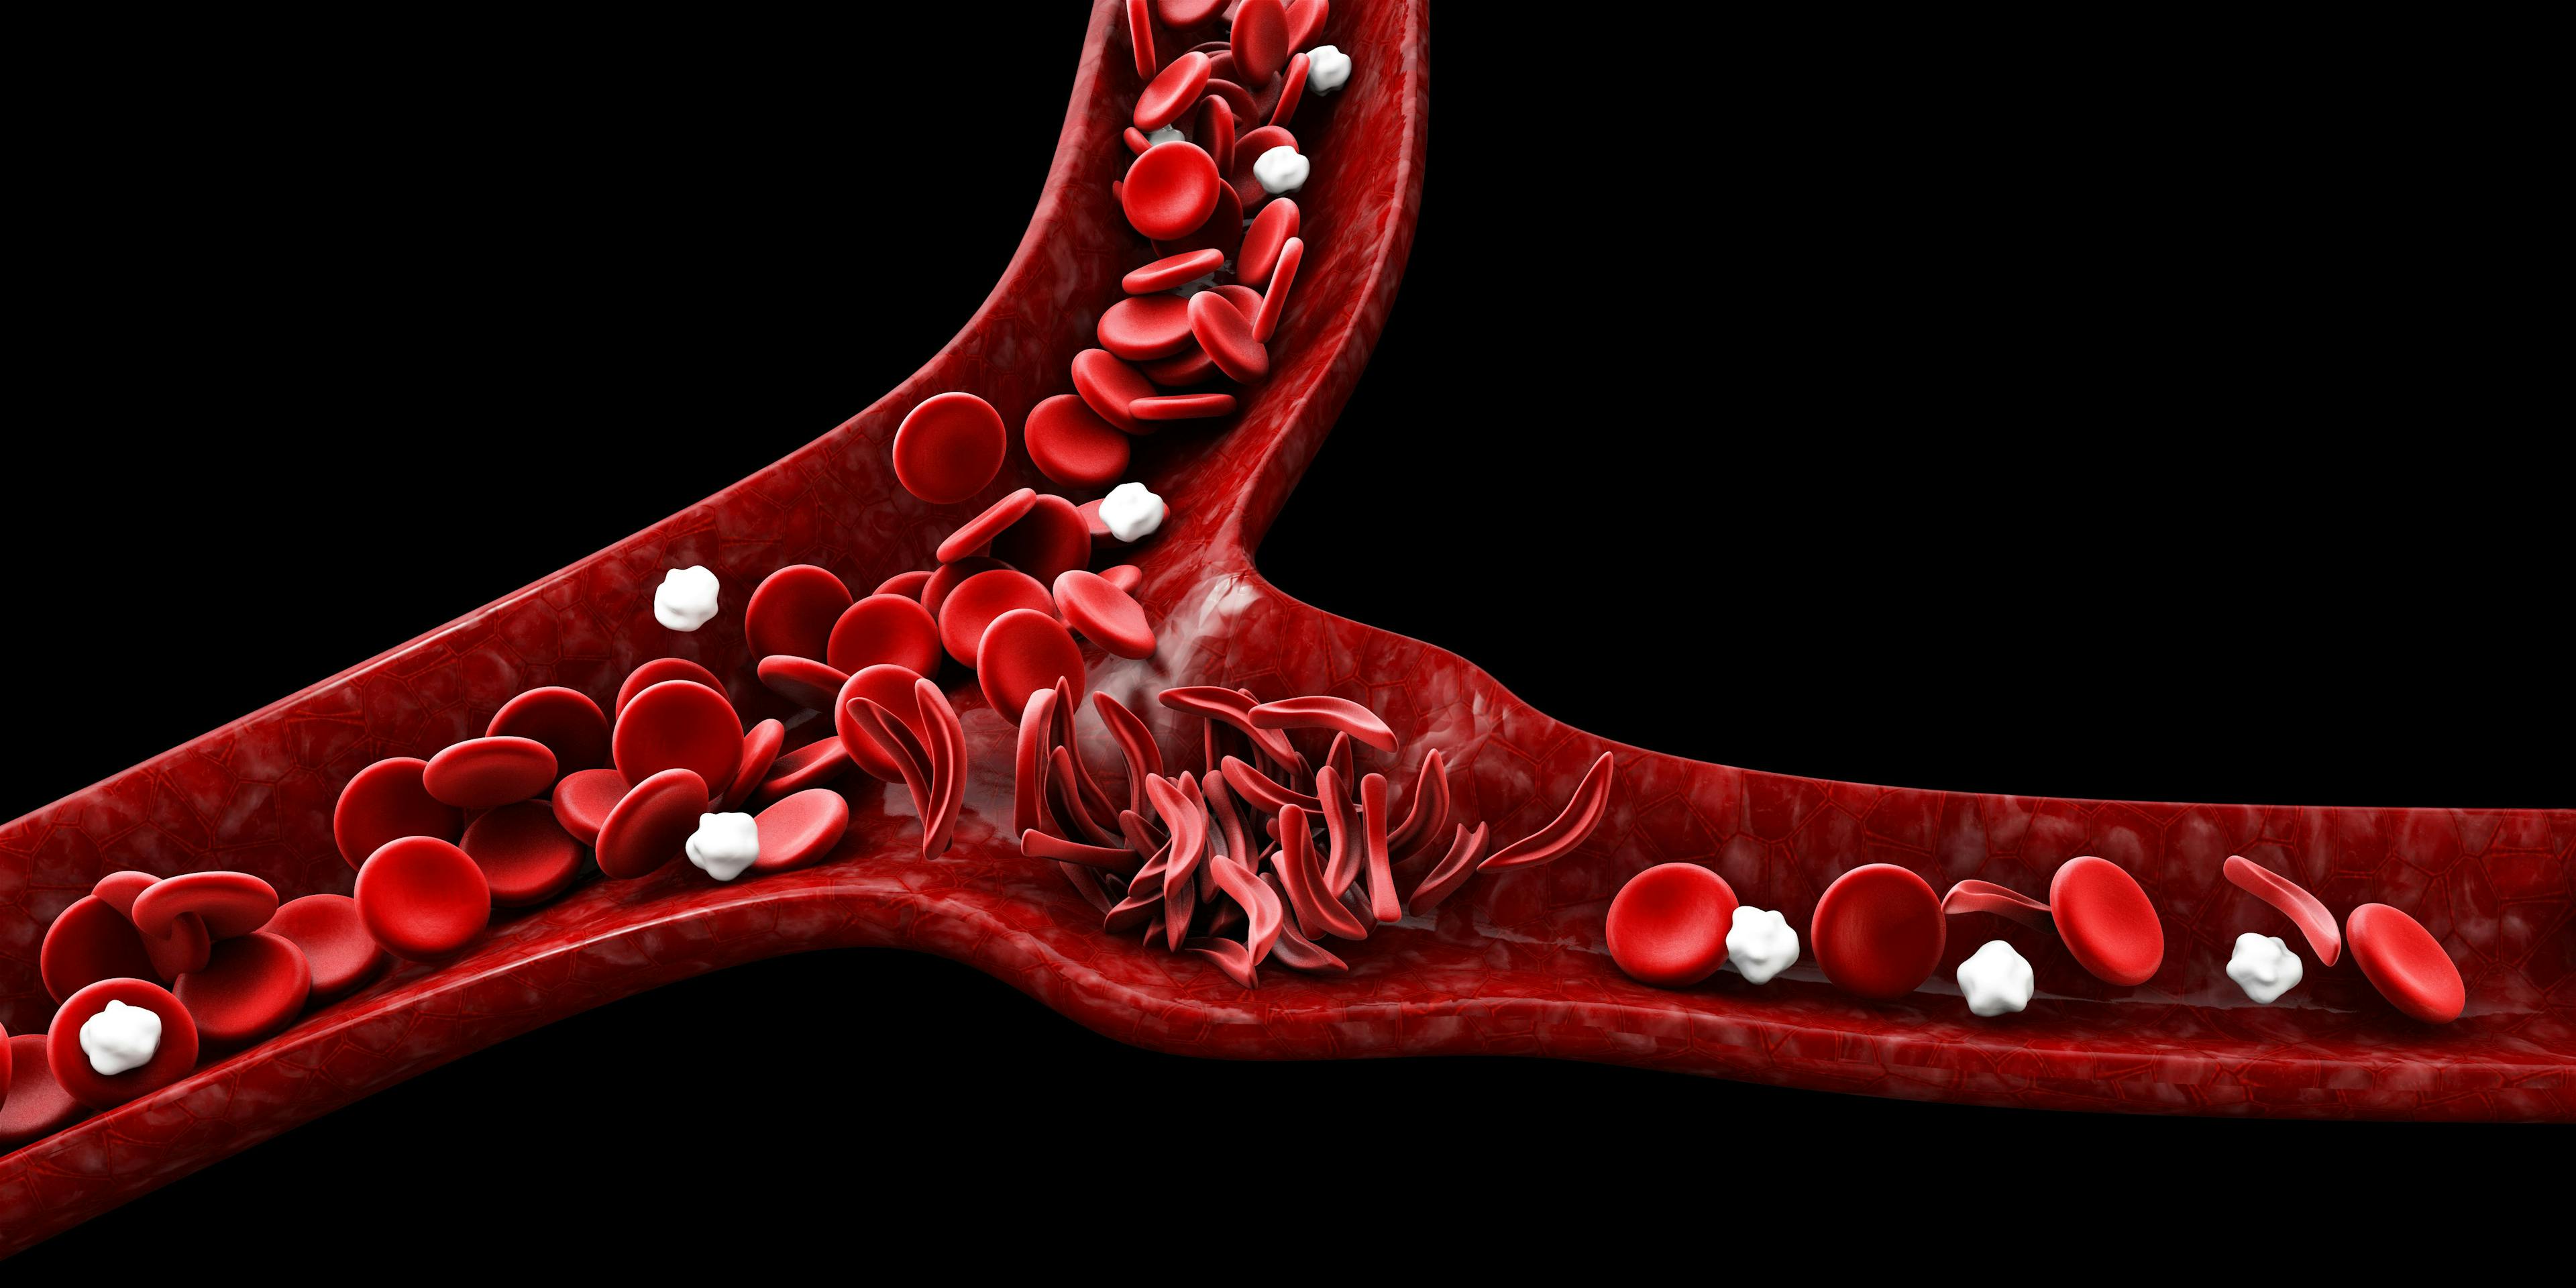 Sickle cell anemia, 3D illustration showing blood vessel with normal and deformed crescent | Image credit: tussik - stock.adobe.com